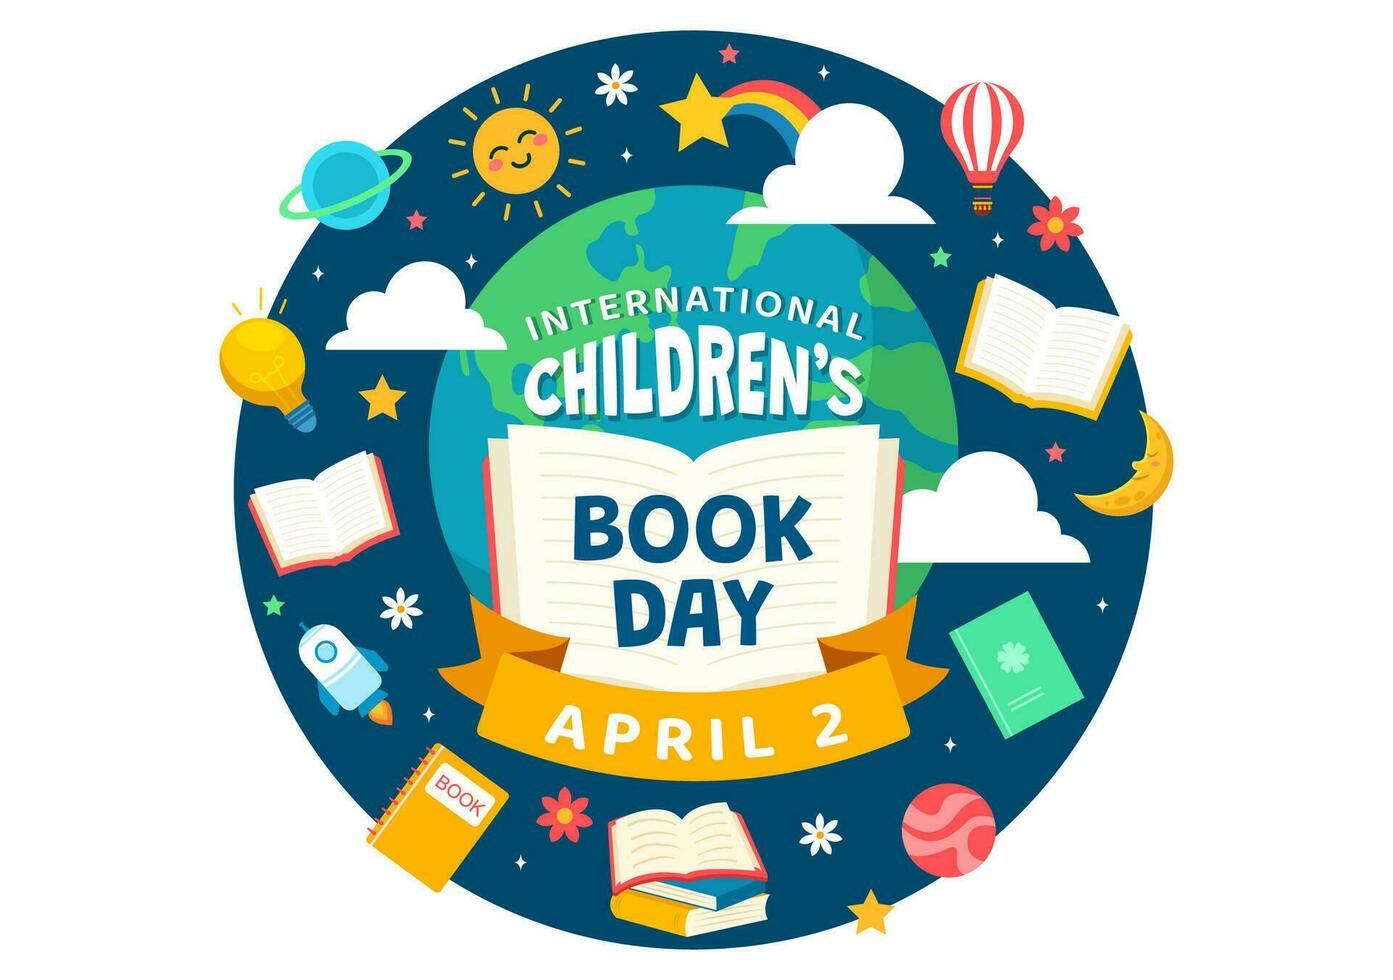 International Children's Book Day Vector Illustration on 2 April with Kids Reading a Books and Globe Map in Flat Cartoon Background Design